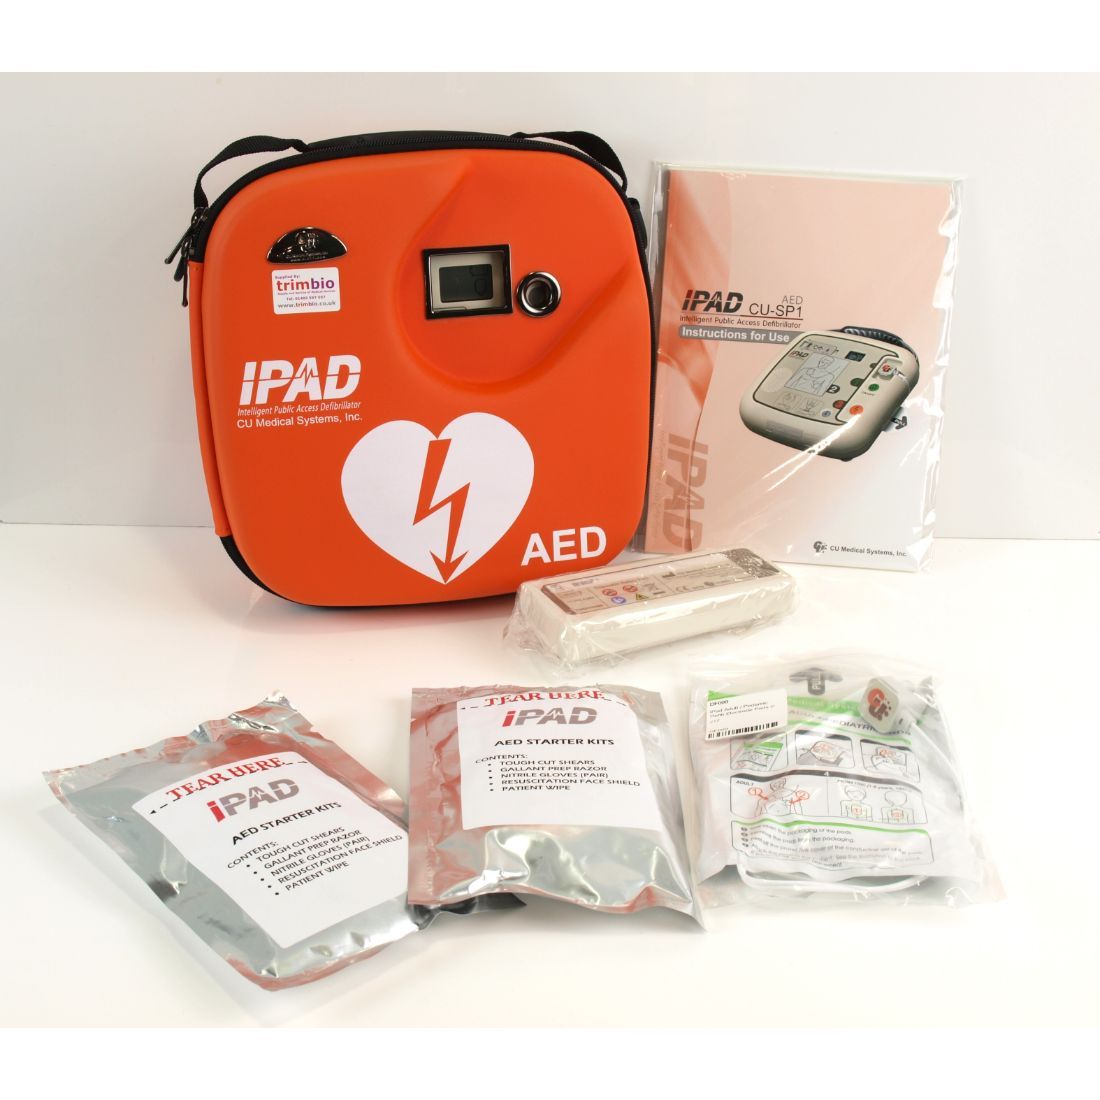 CU Medical Systems iPAD SP1 Fully Auto Starter Kit